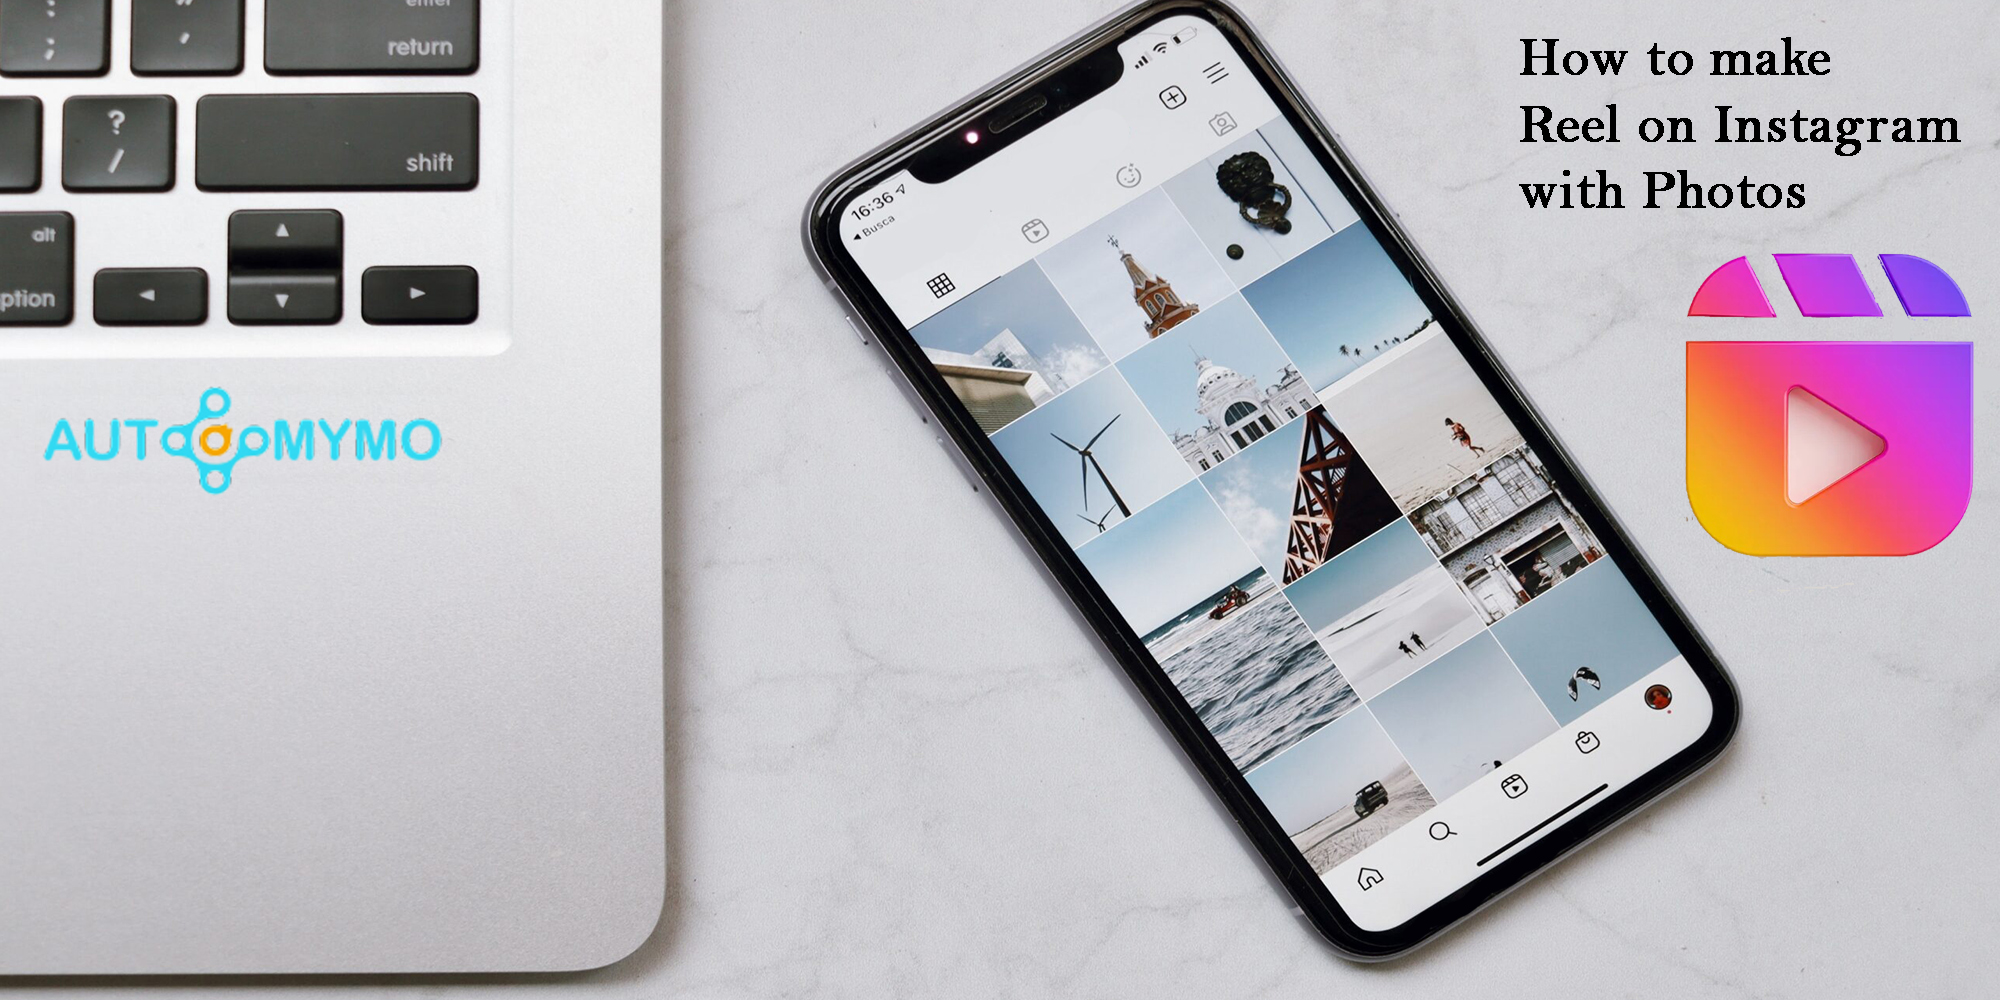 Make a Reel on Instagram with Photos